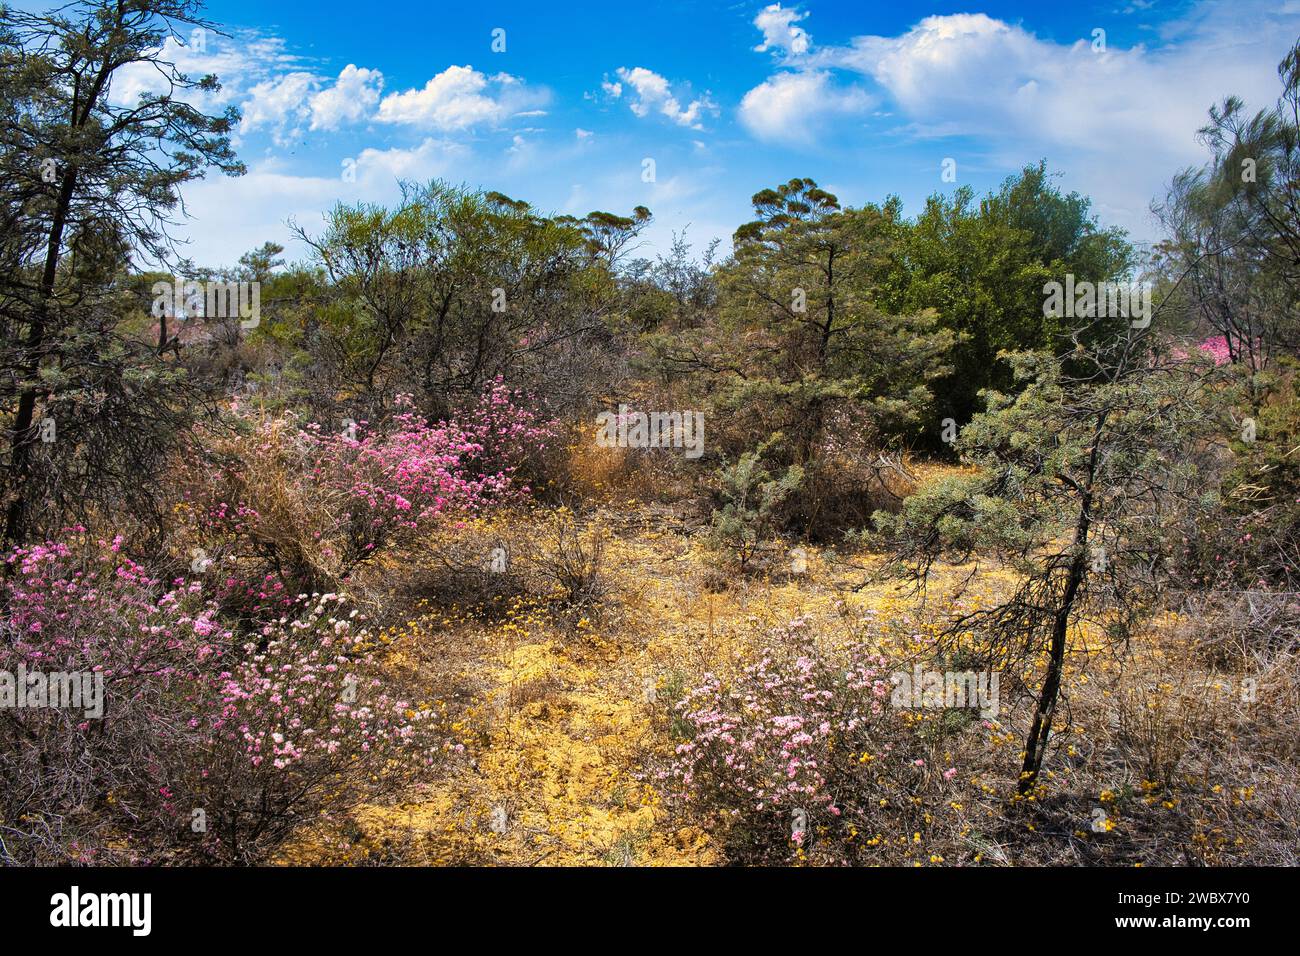 Wildflowers (especially Verticordia or featherflower) and cypresses in the bushland of Reynoldson Reserve, Wongan Hills, midwest of Western Australia Stock Photo